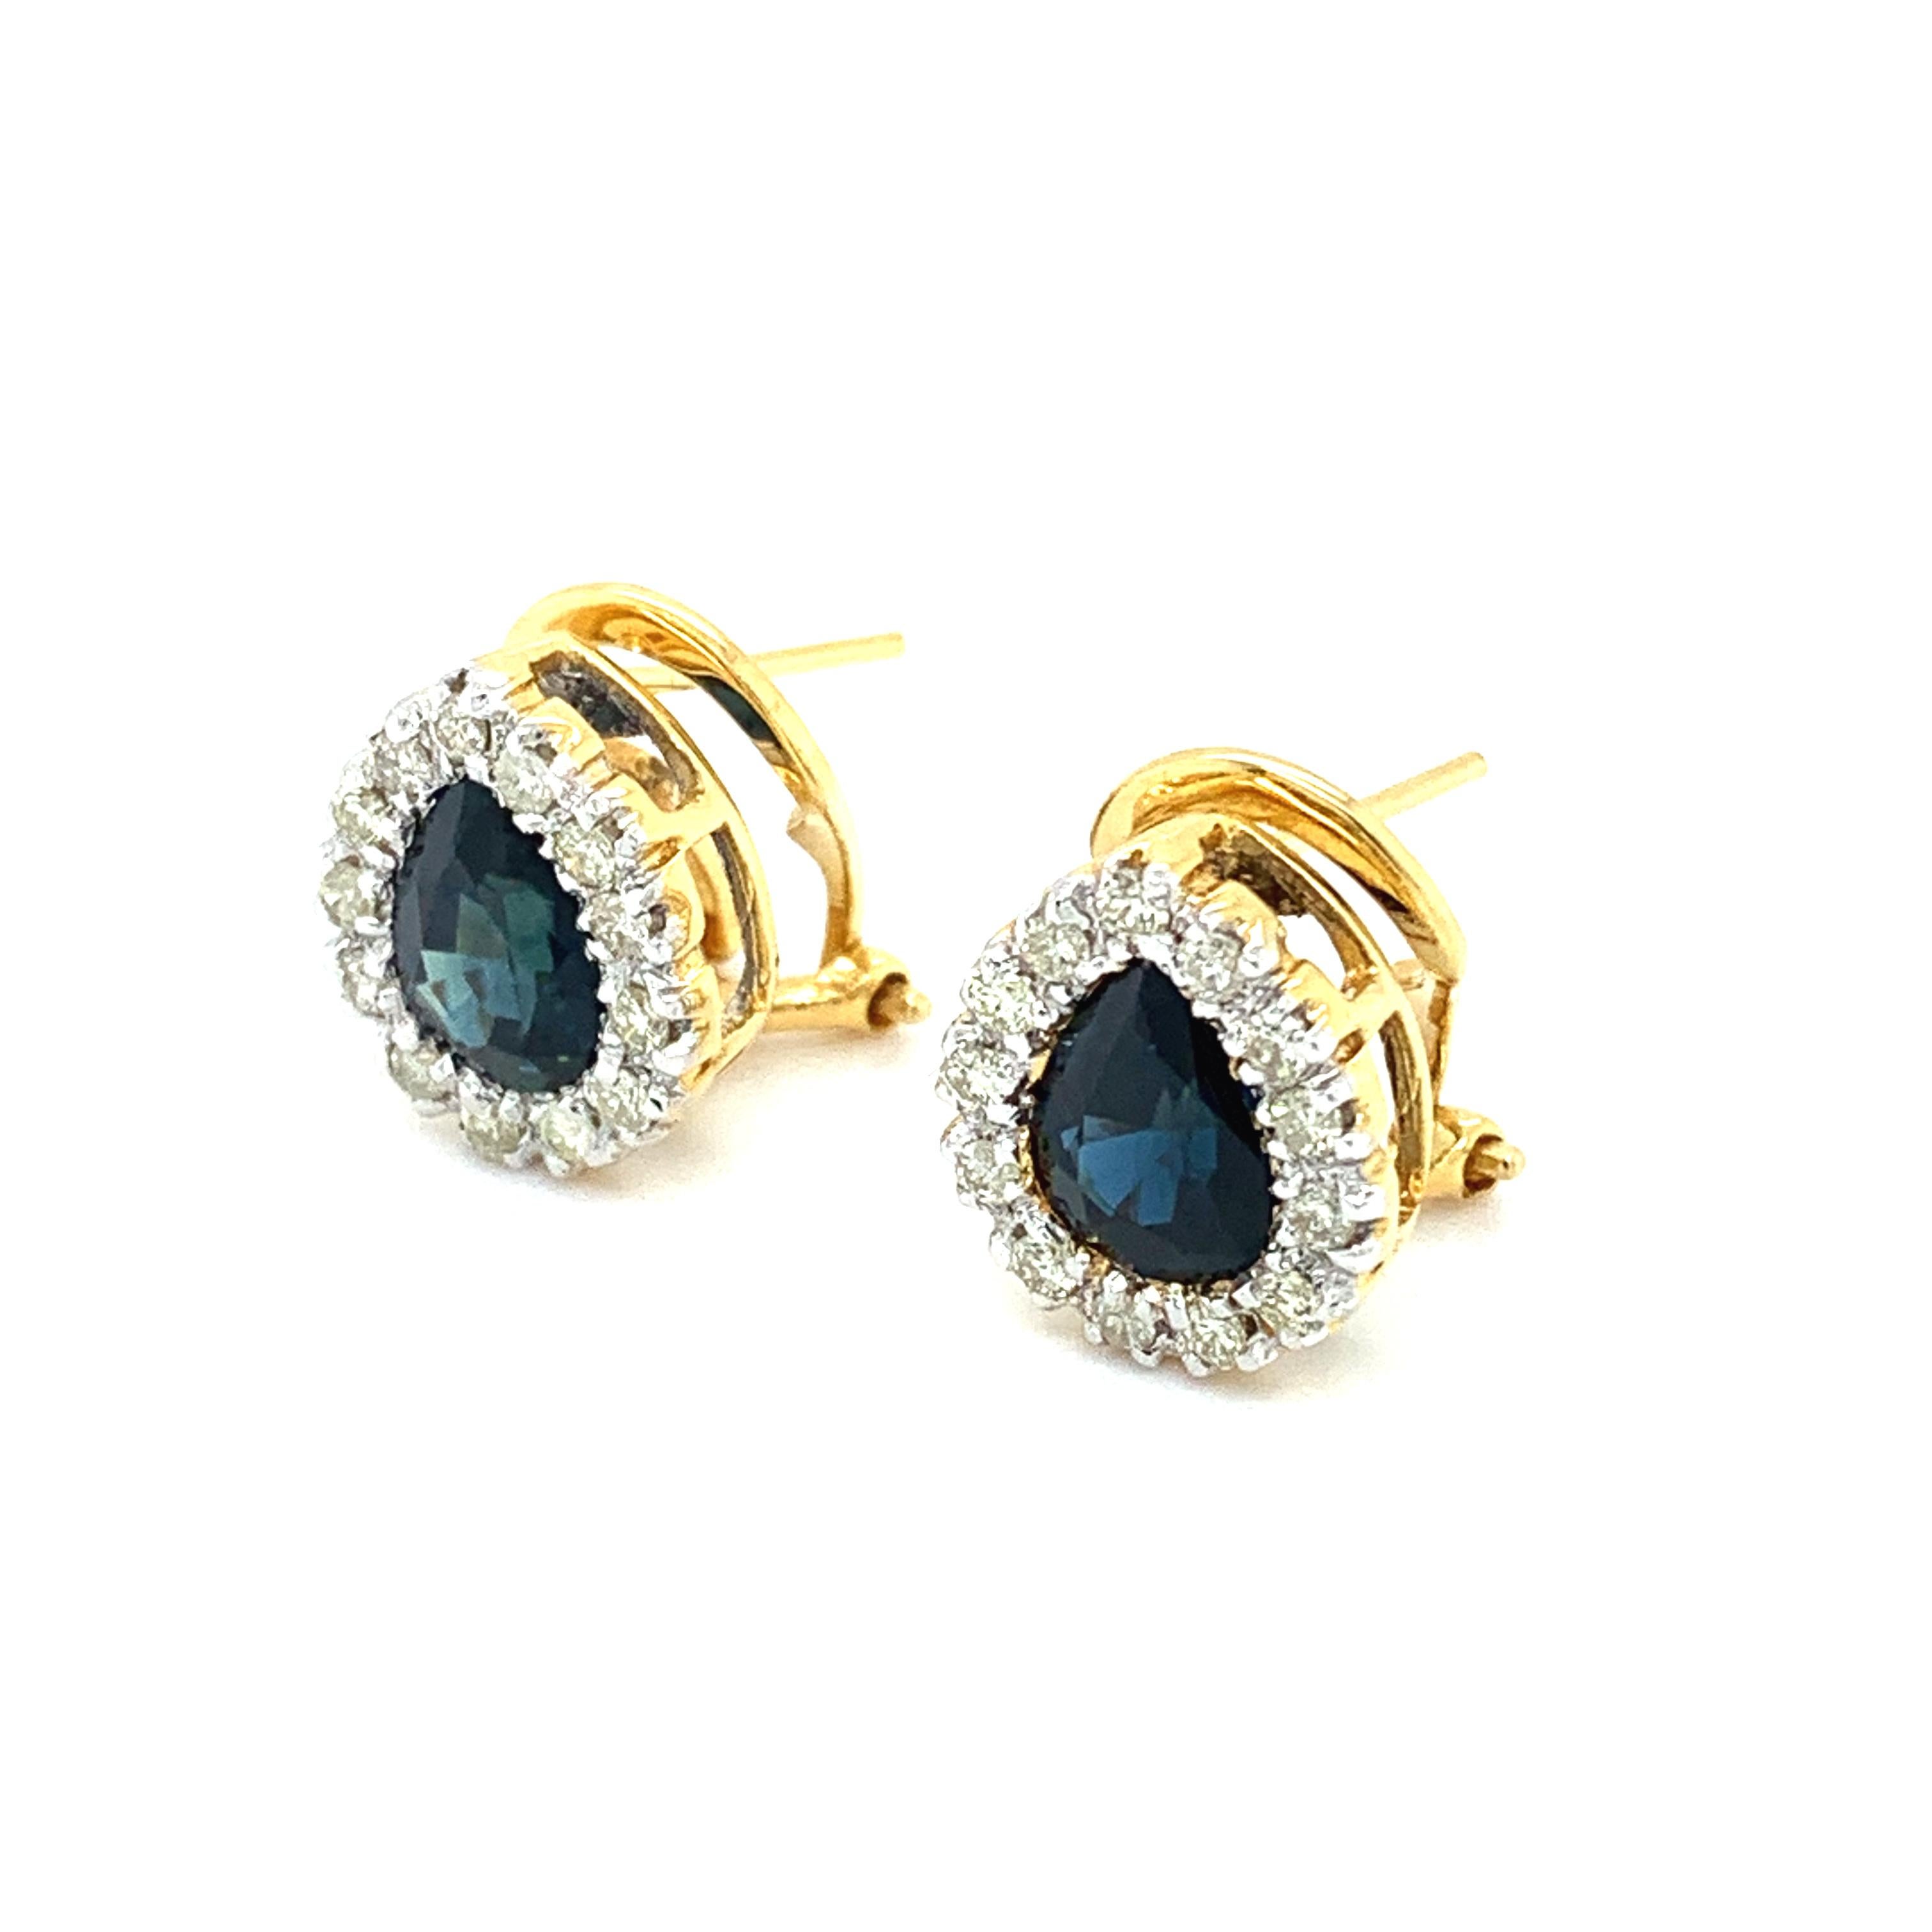 Sapphire and diamond halo art deco post and clip earrings in 18k yellow gold
Sapphire pear shaped gemstone total weight 2.00ct
Diamond round brilliant cut total weight 0.96ct F colour VS1 clarity
Hallmarked
Measurements length approximately 14mm